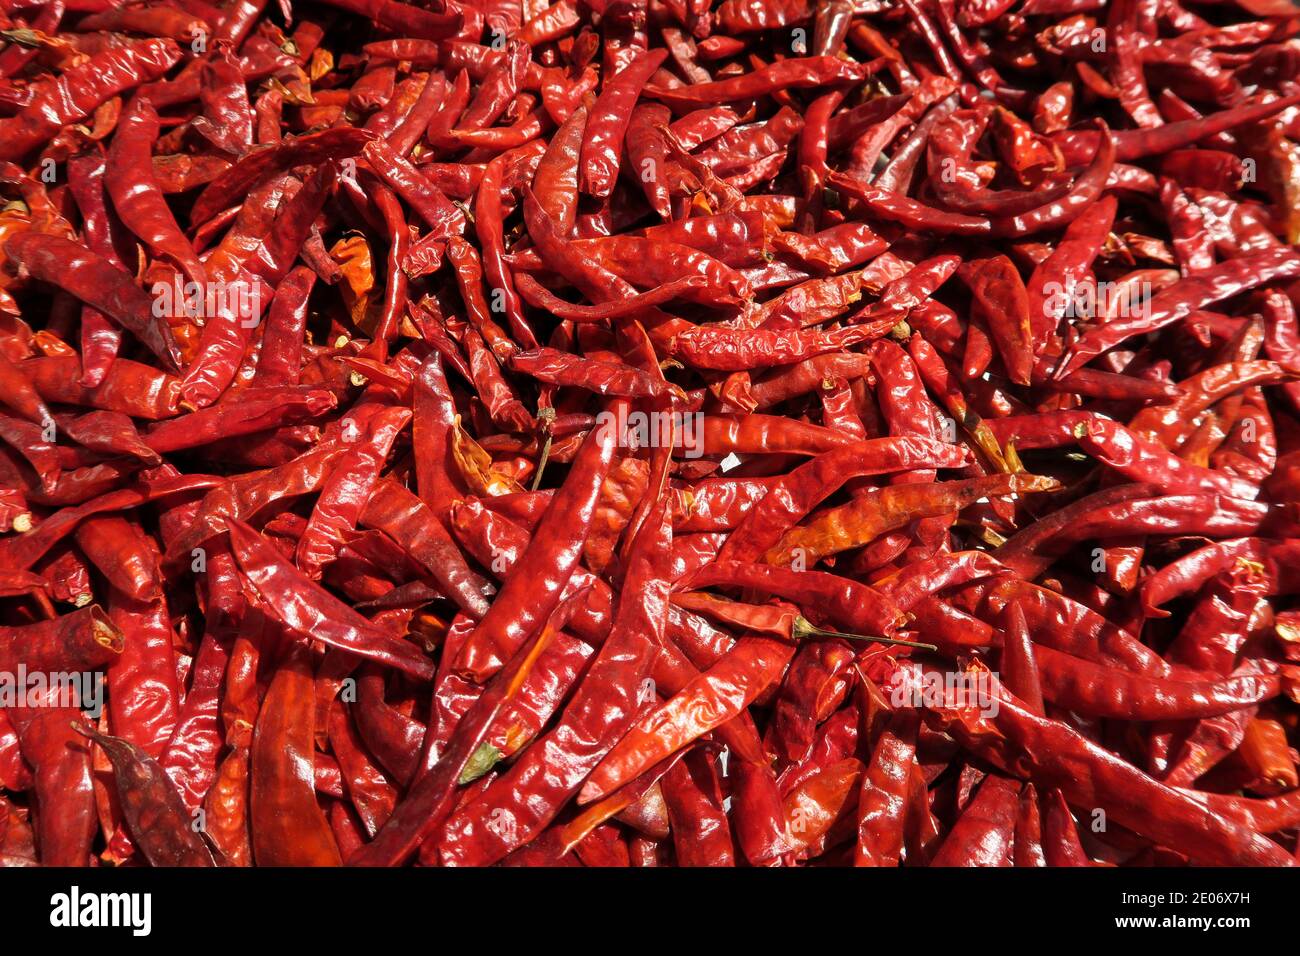 Chilli peppers drying in the sun, Bangkok, Thailand Stock Photo